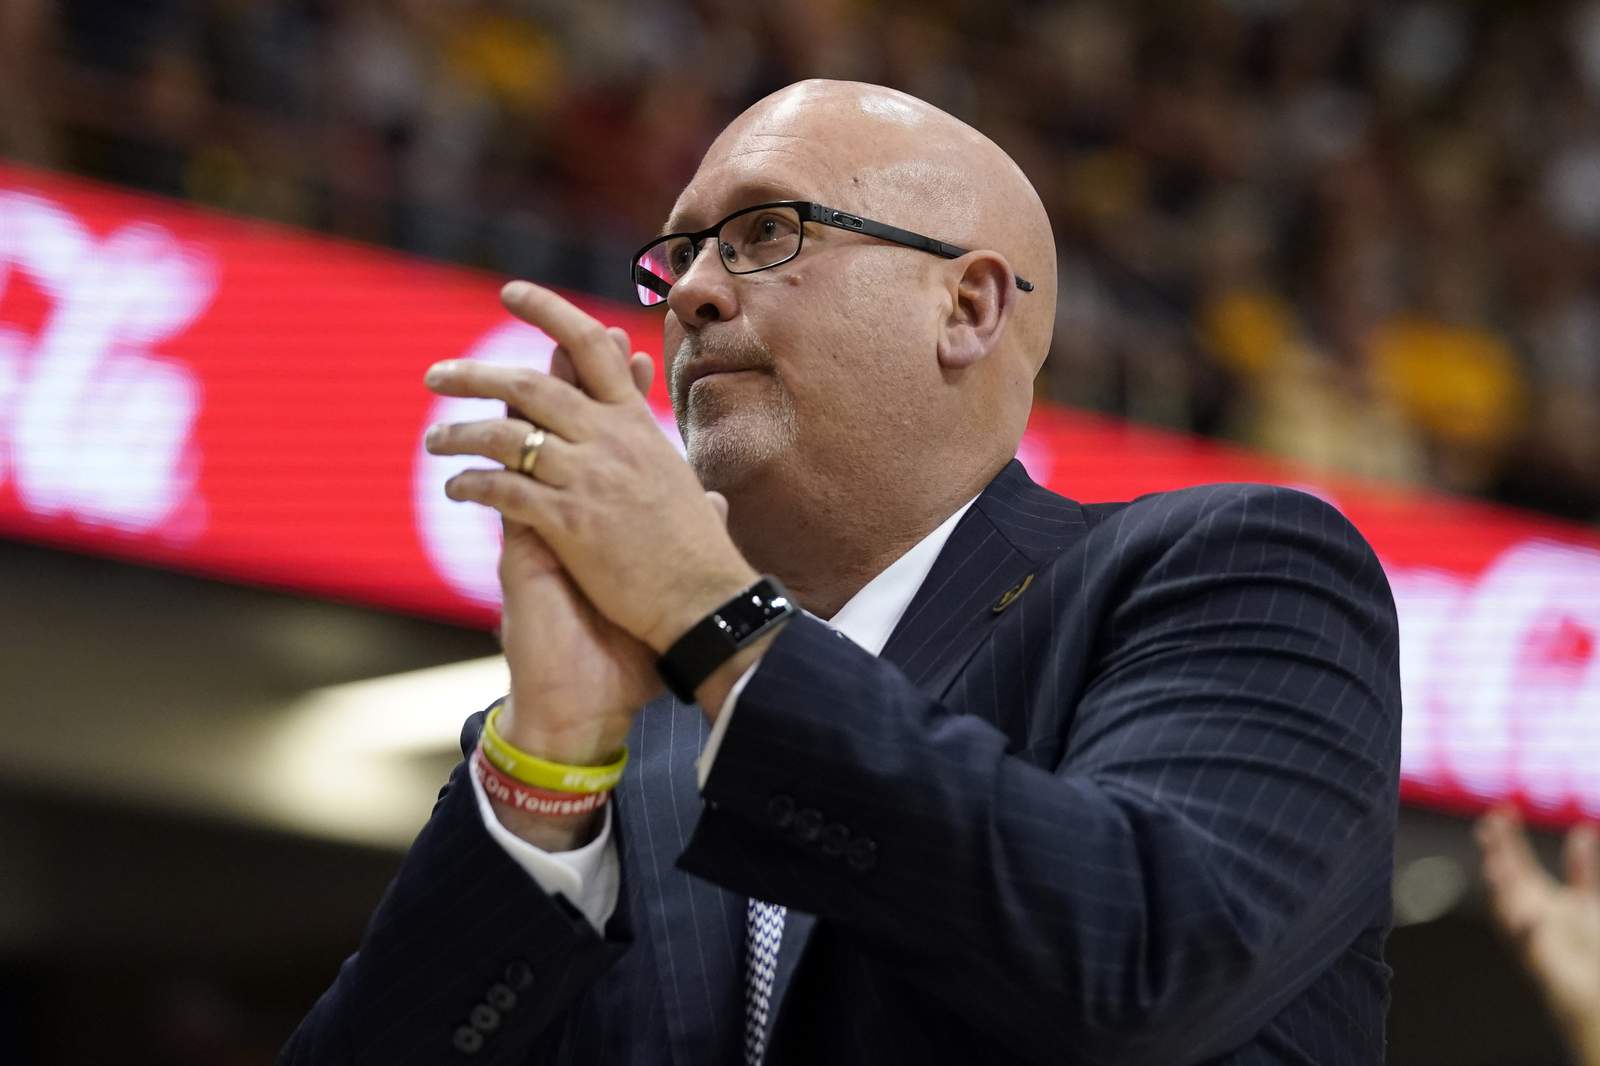 Some new college hoop coaches turn to experienced transfers